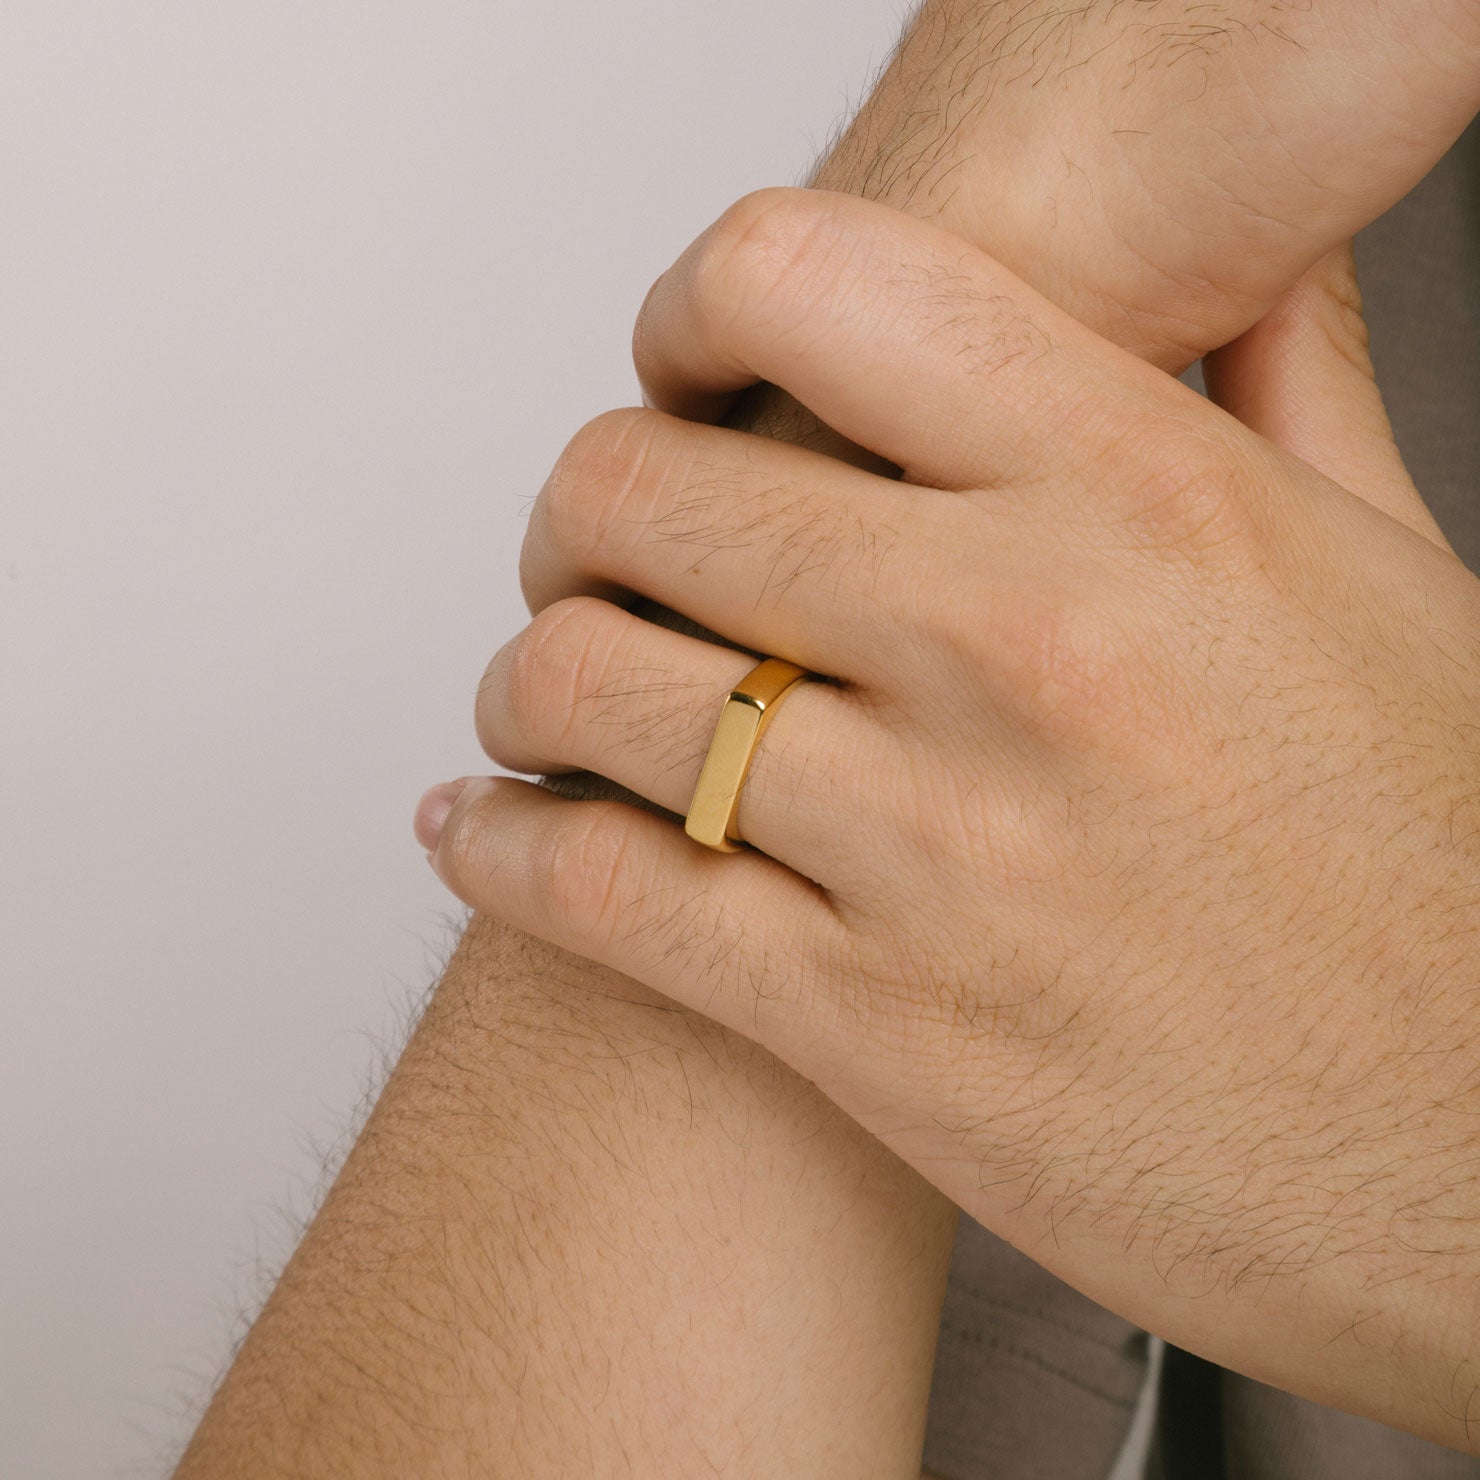 A model wearing the Straight Band Ring is crafted in 18K Gold Plated metal with a 4mm width and boasts non-tarnish and water-resistance properties.